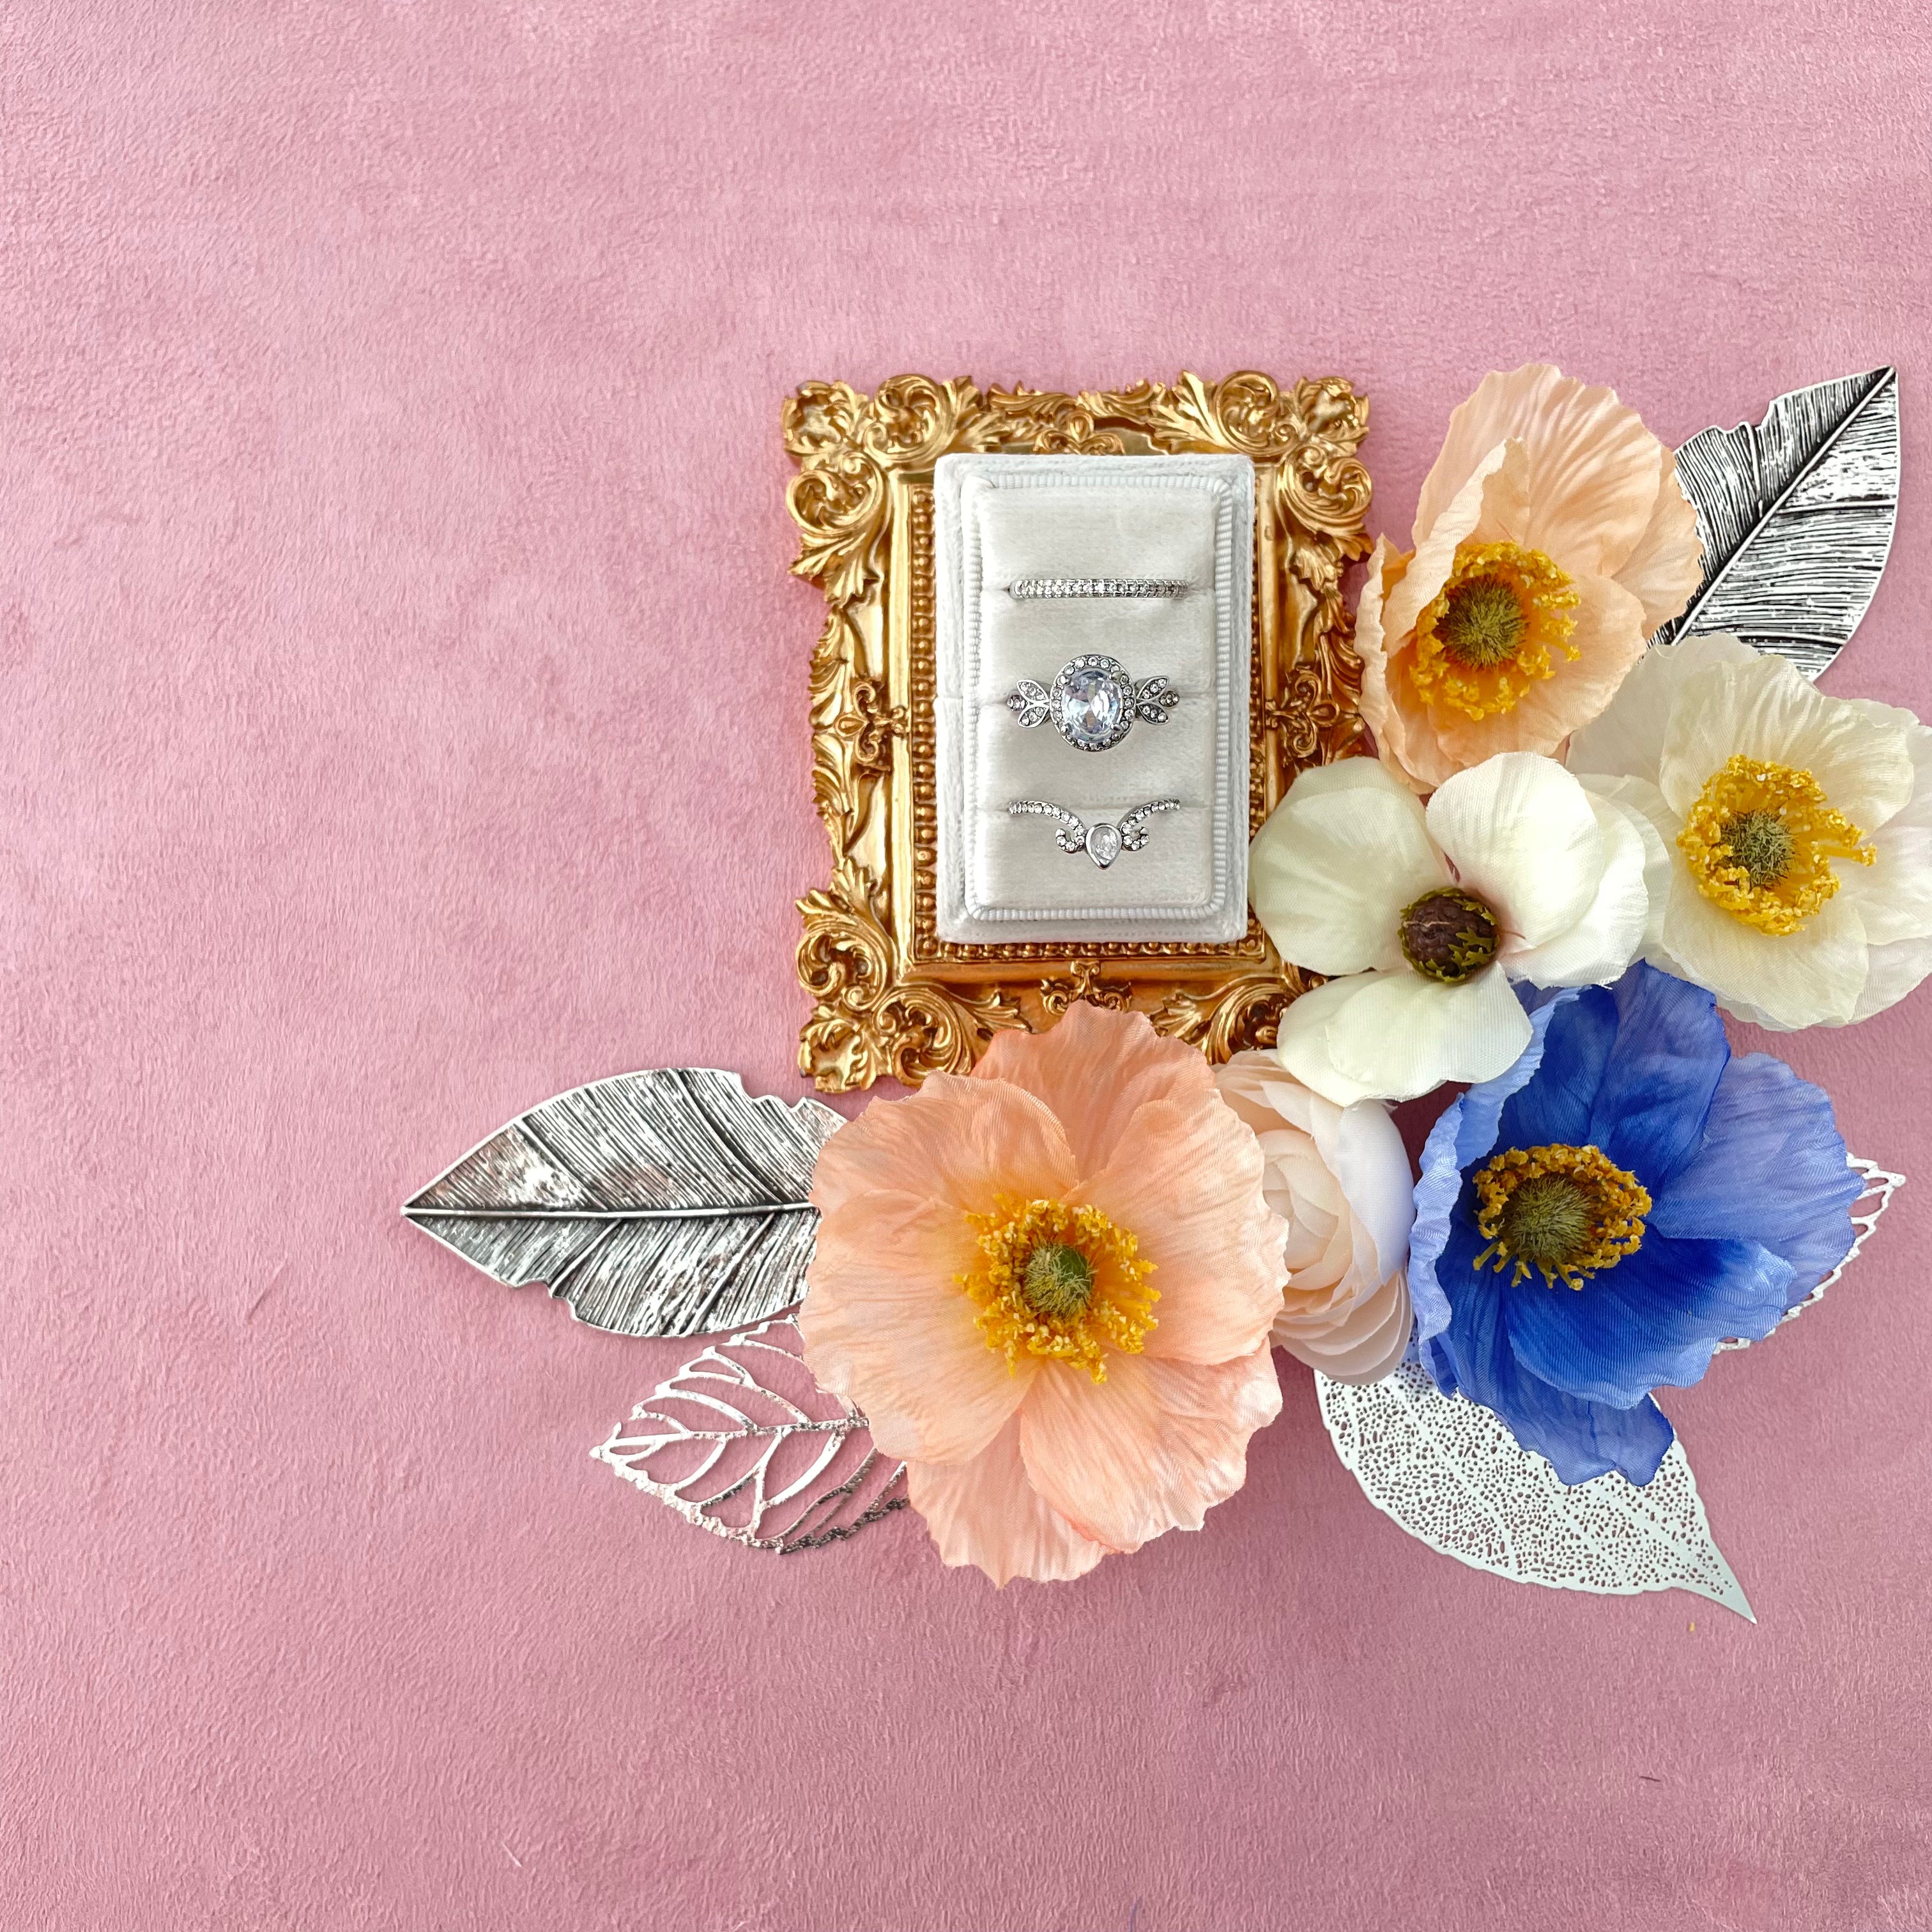 White triple slot ring box on vintage gold tray styled with variety of colored florals  - Wedding Flat lay props from Champagne & GRIT